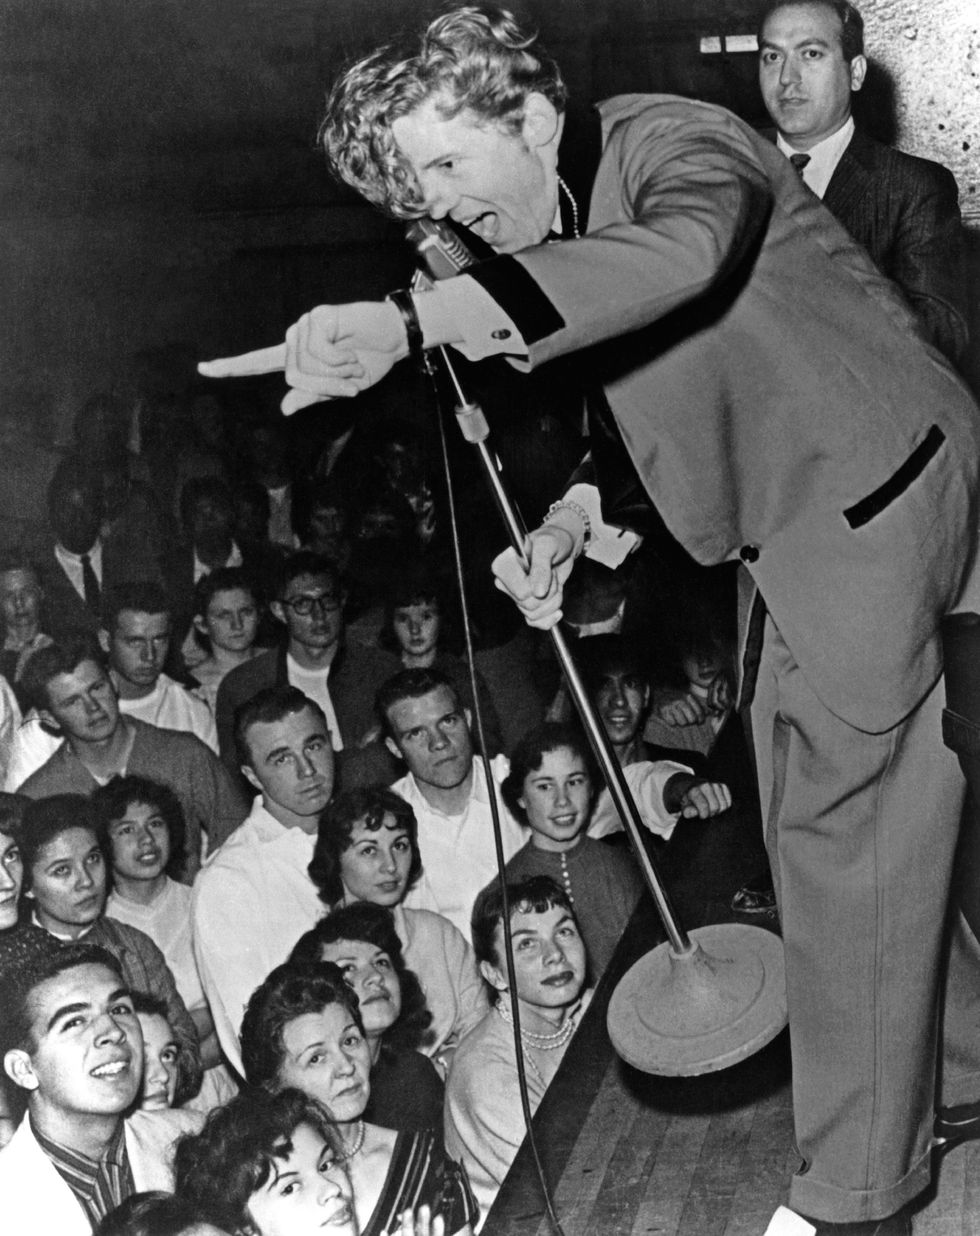 jerry lee lewis performs on stage